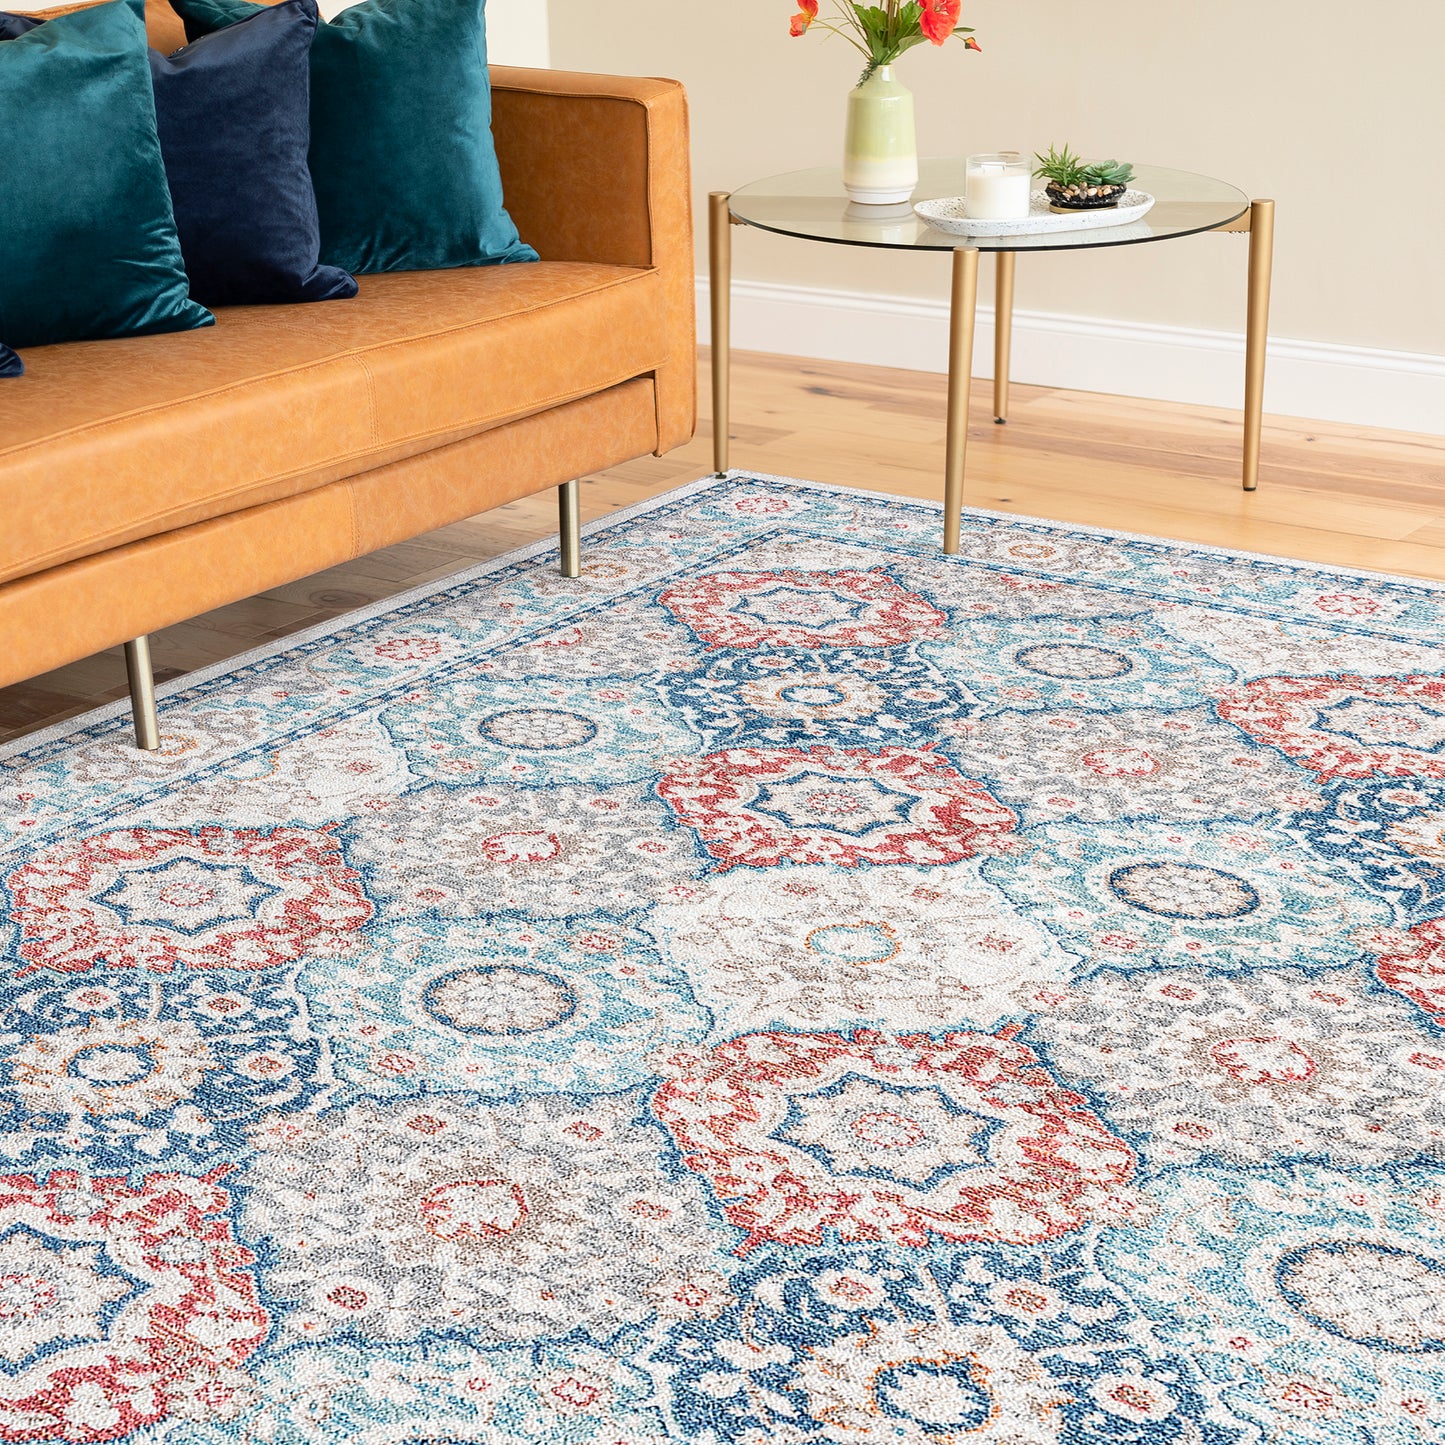 Garden-GRD65 Cut Pile Synthetic Blend Indoor Area Rug by Tayse Rugs